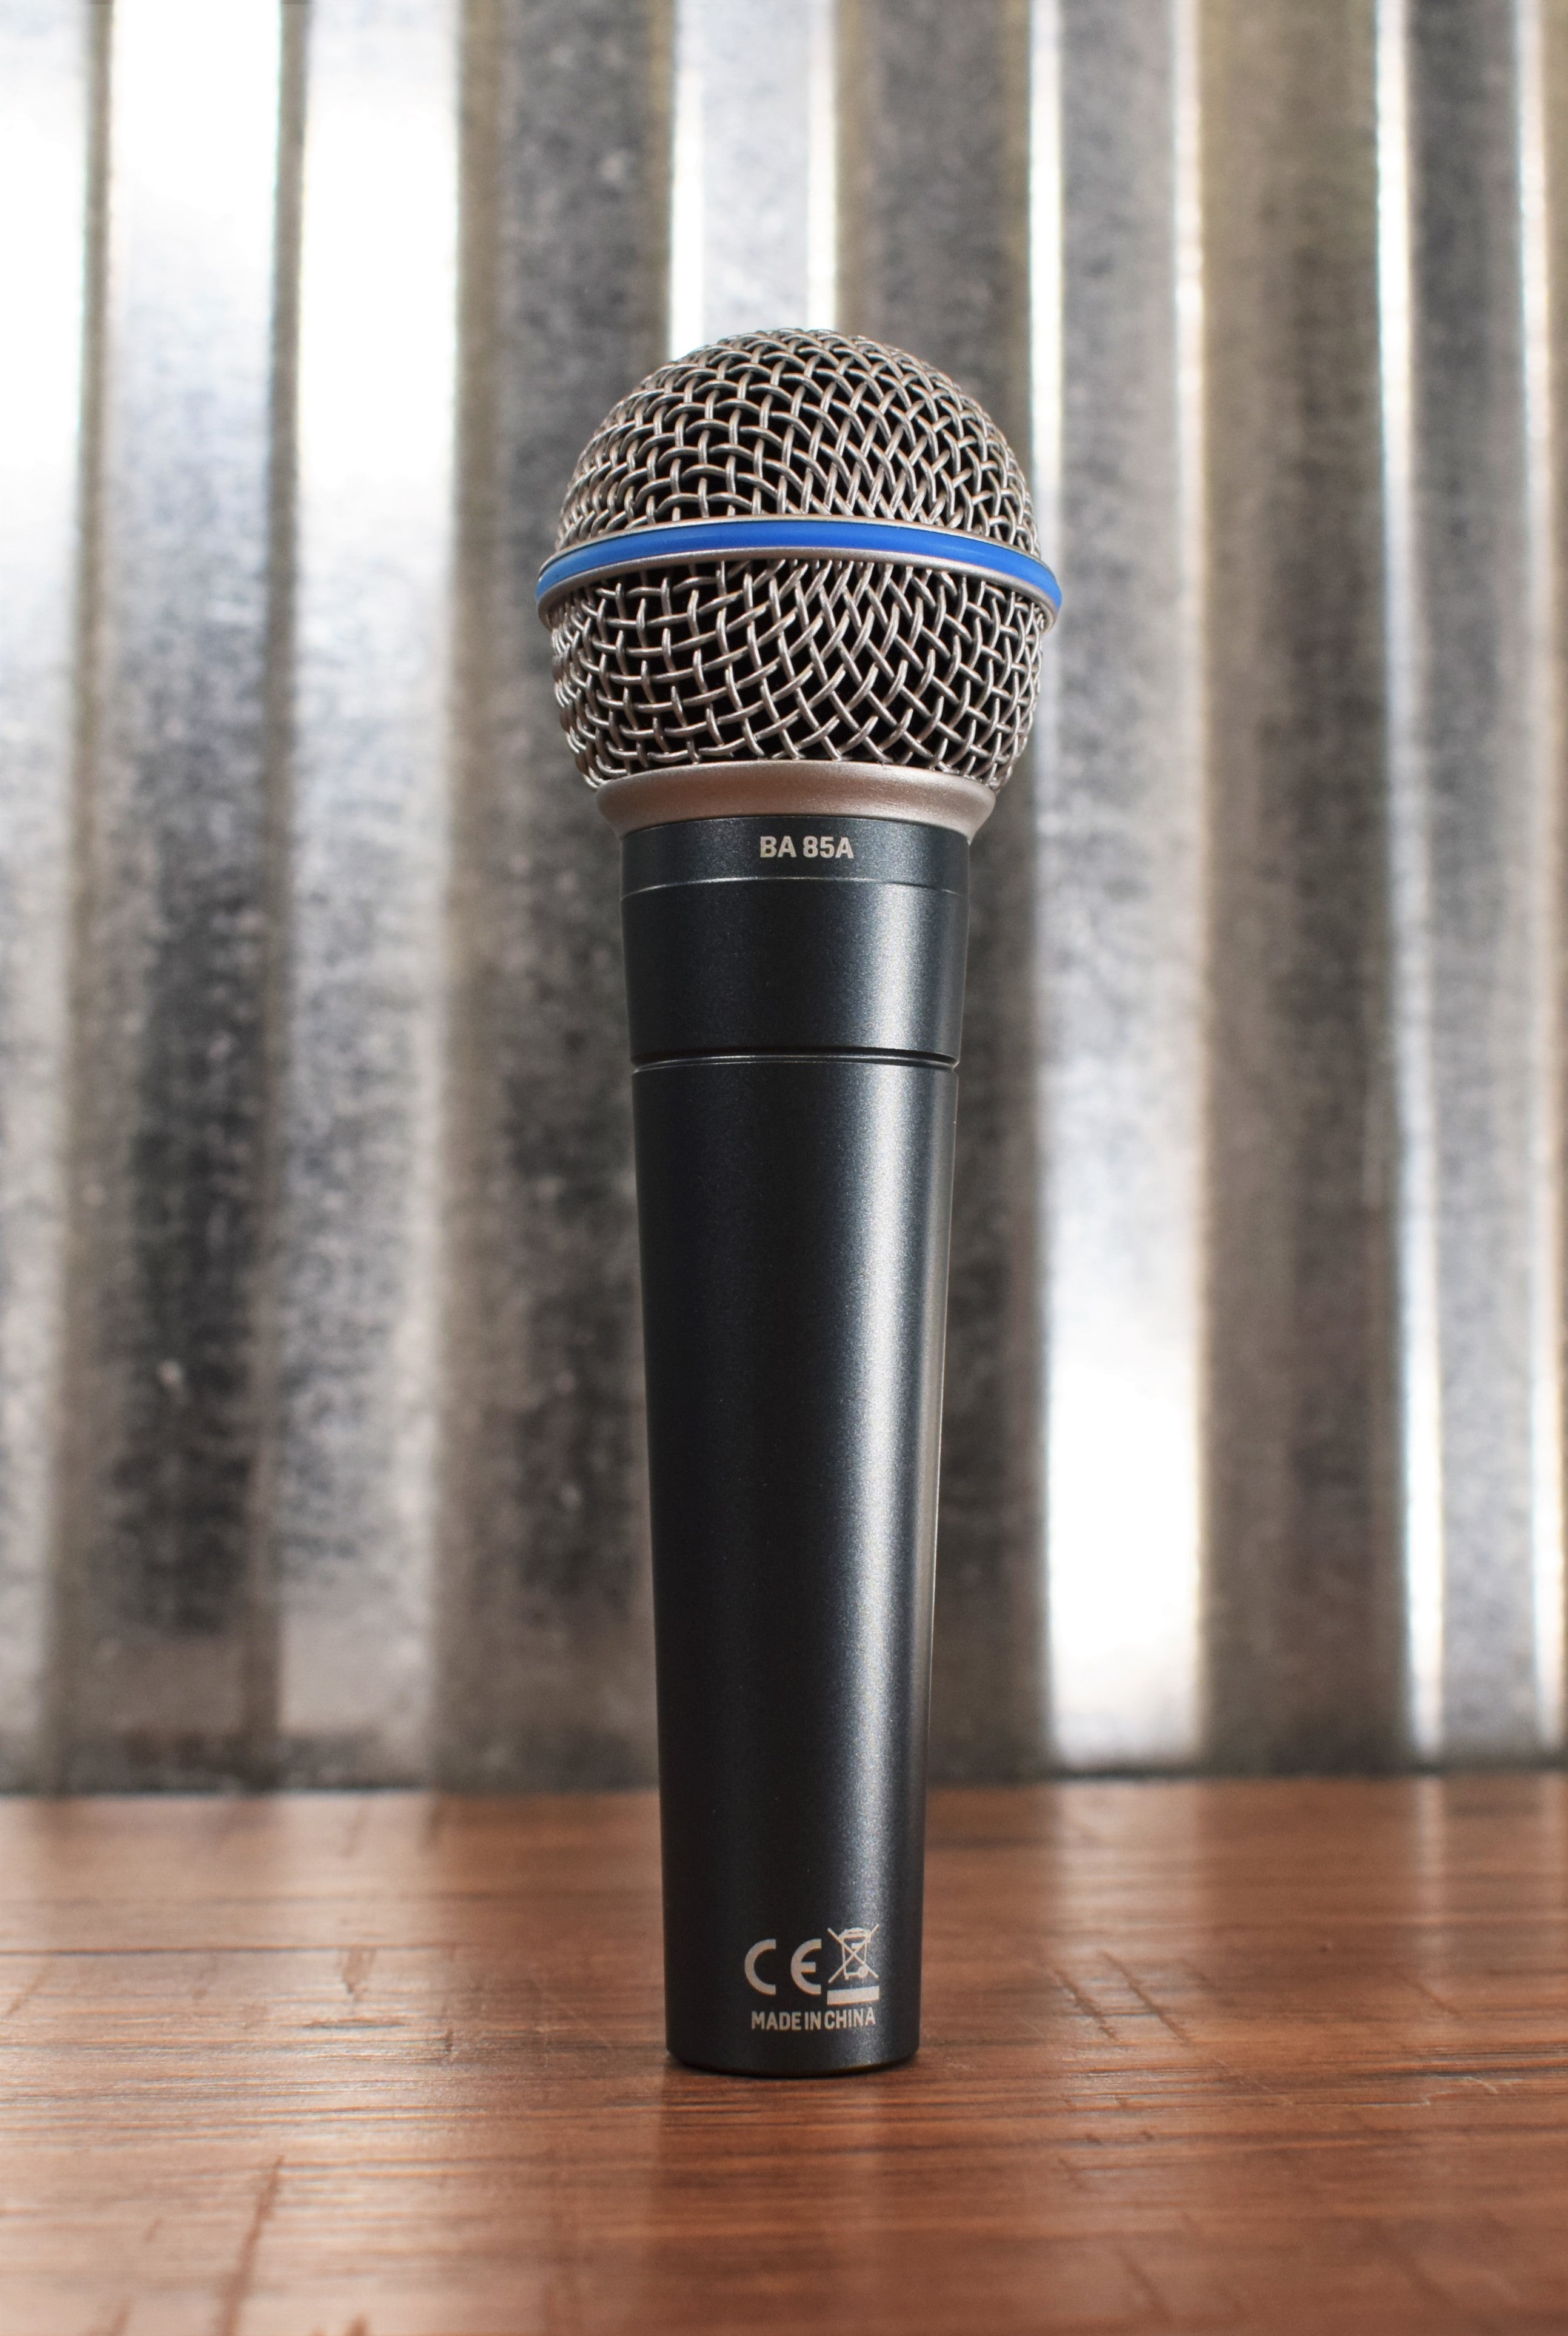 Behringer　Microphone　Handheld　BA85A　Dynamic　Vocal　Super　Traders　Cardioid　Pac　–　Specialty